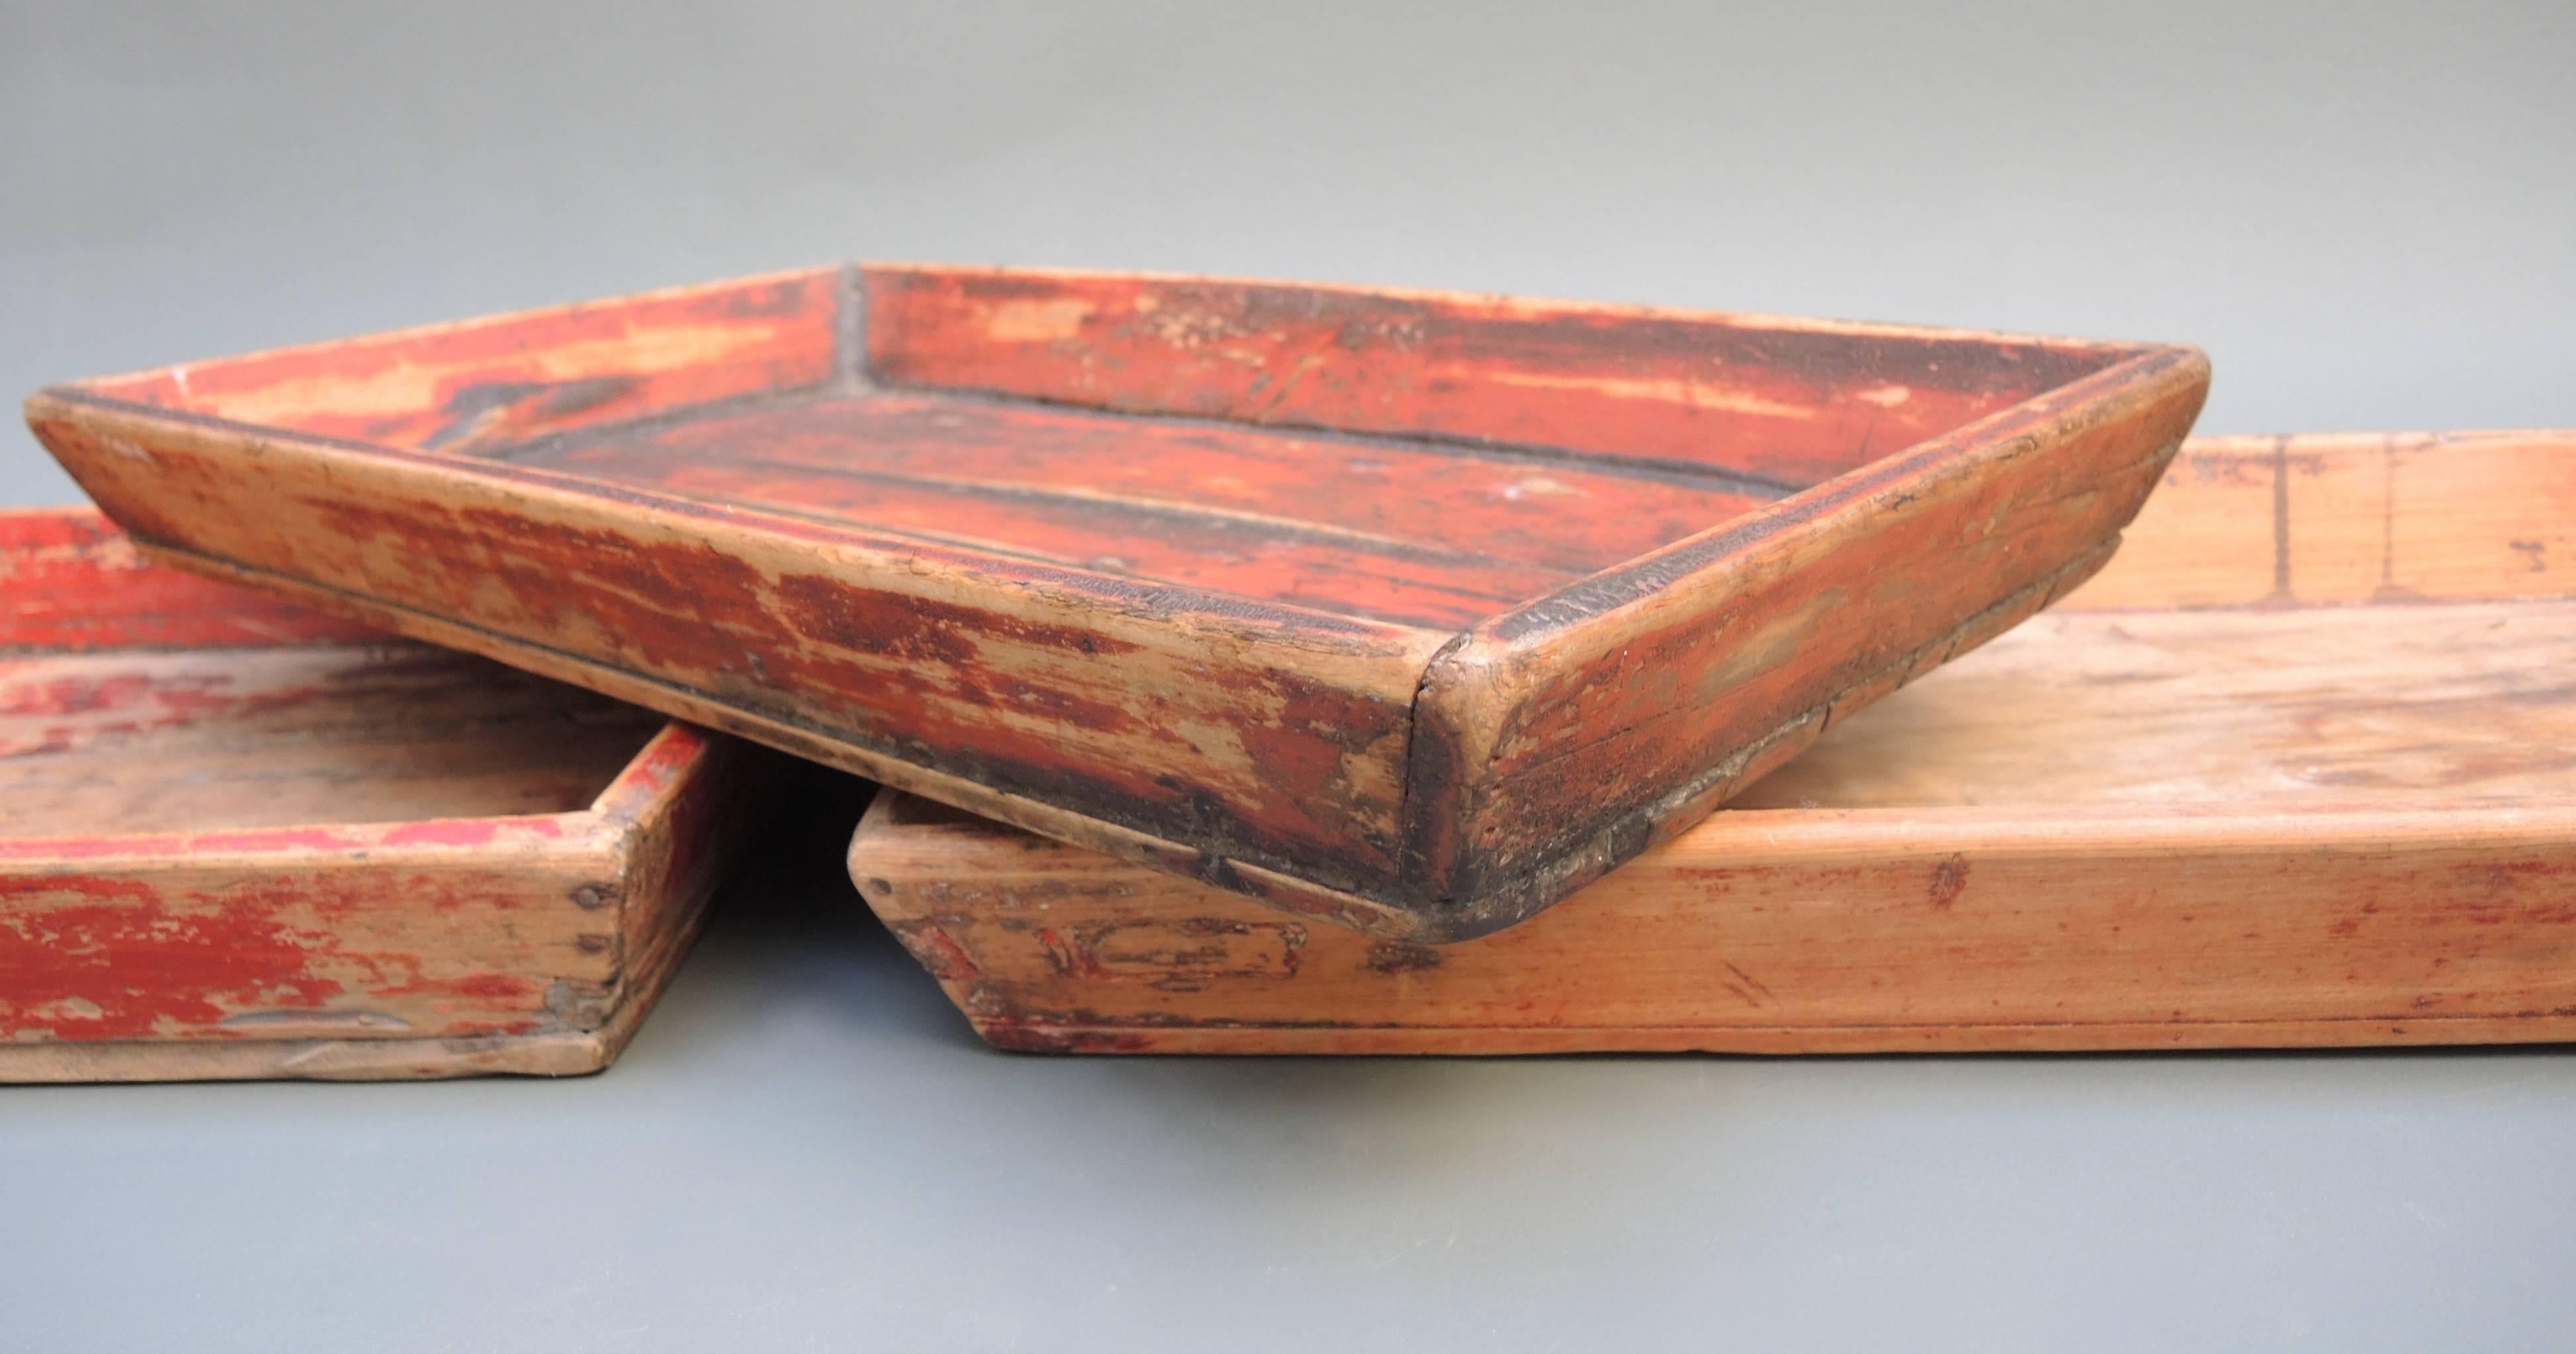 Antique Chinese Provincial trays retaining the original paint and a wonderfully soft worn patina. They are well constructed and as useful and strong today as they were over 100 years ago.
The measurement listed is approximate as each tray is